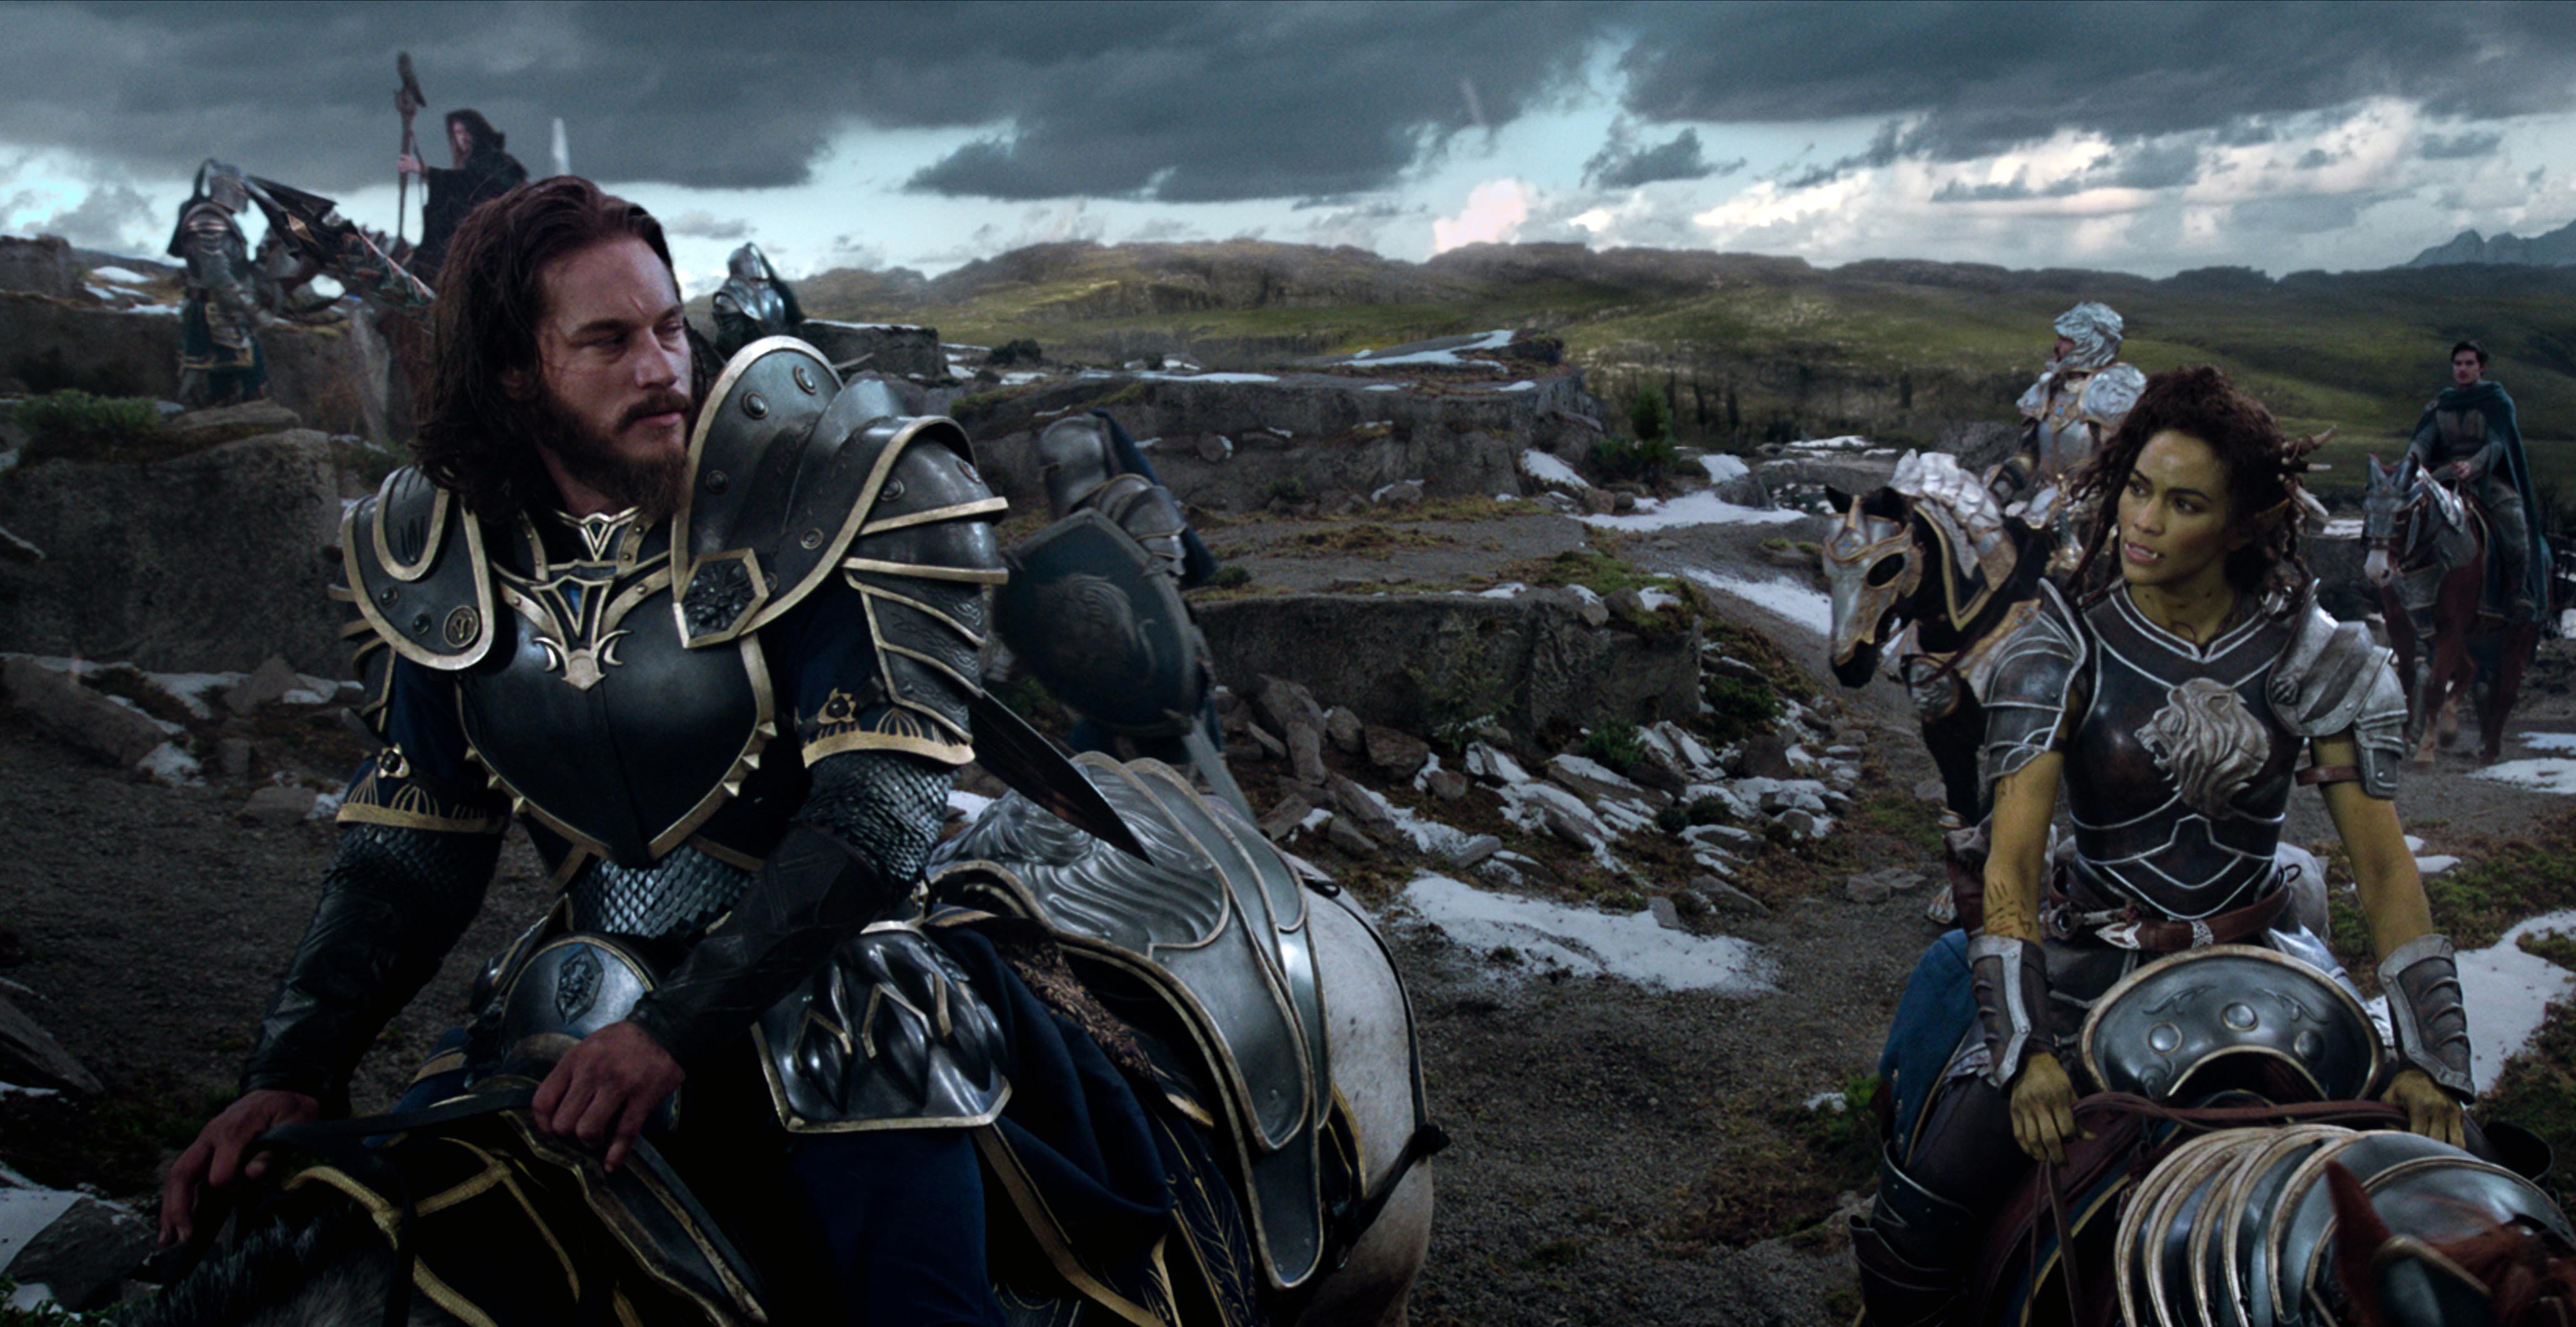 SOLID SHOWINGS: Travis Fimmel and Paula Patton in Warcraft.